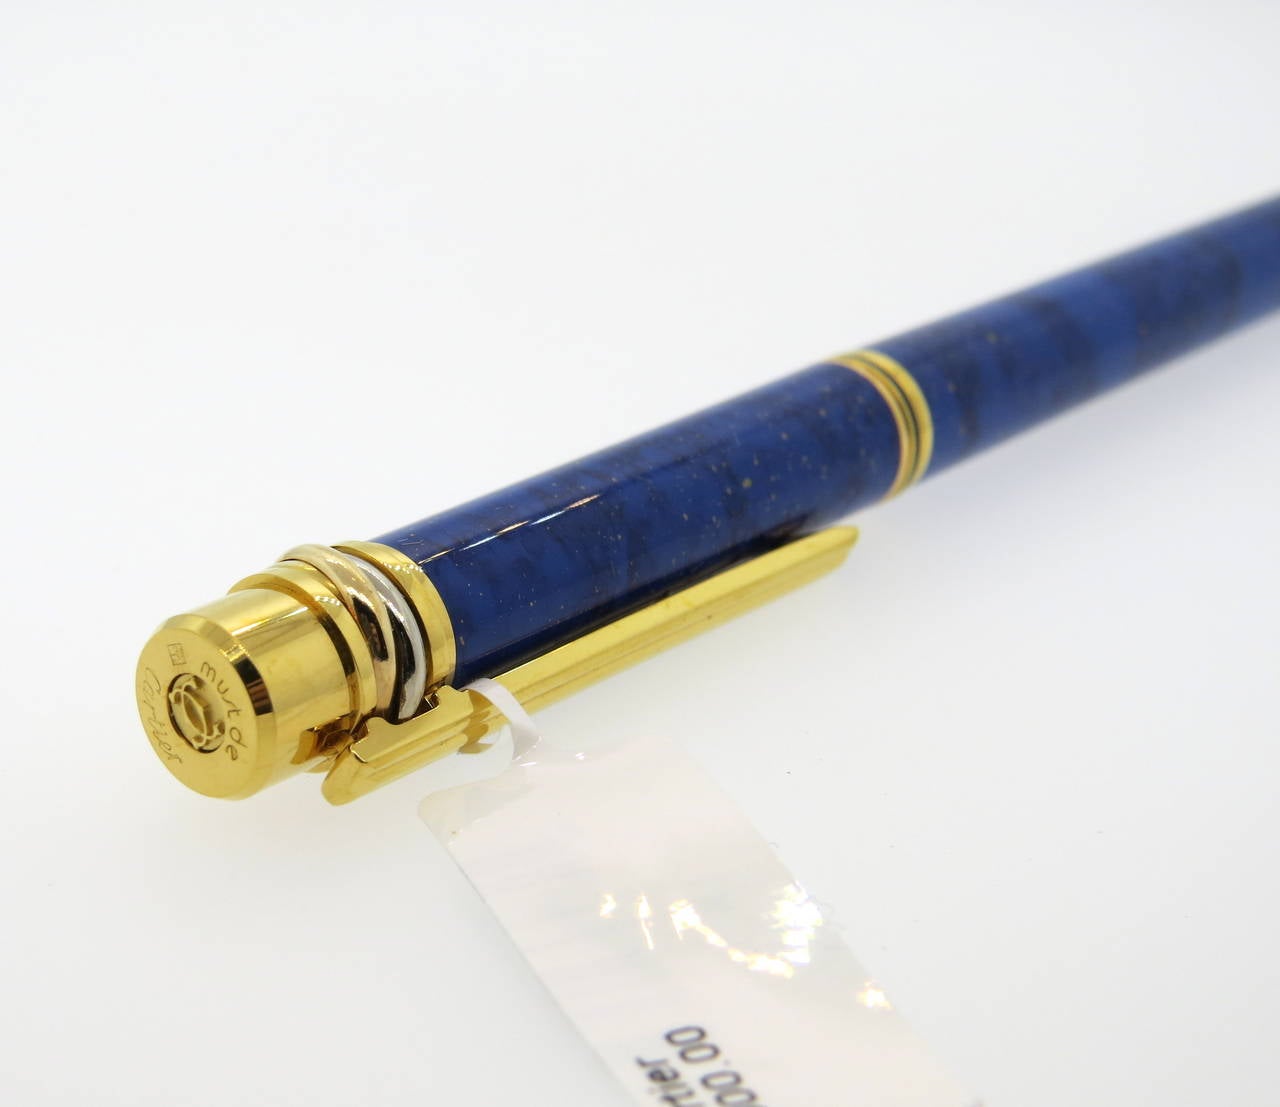 Cartier Must de Cartier lapis lazzuli lacquer fountain pen with classic trinity rings around pen cap. Pen features an 18K gold nib and gold plated finishes. Pen measures 140mm long. Pen is a brand new in store sample, comes with original box, papers